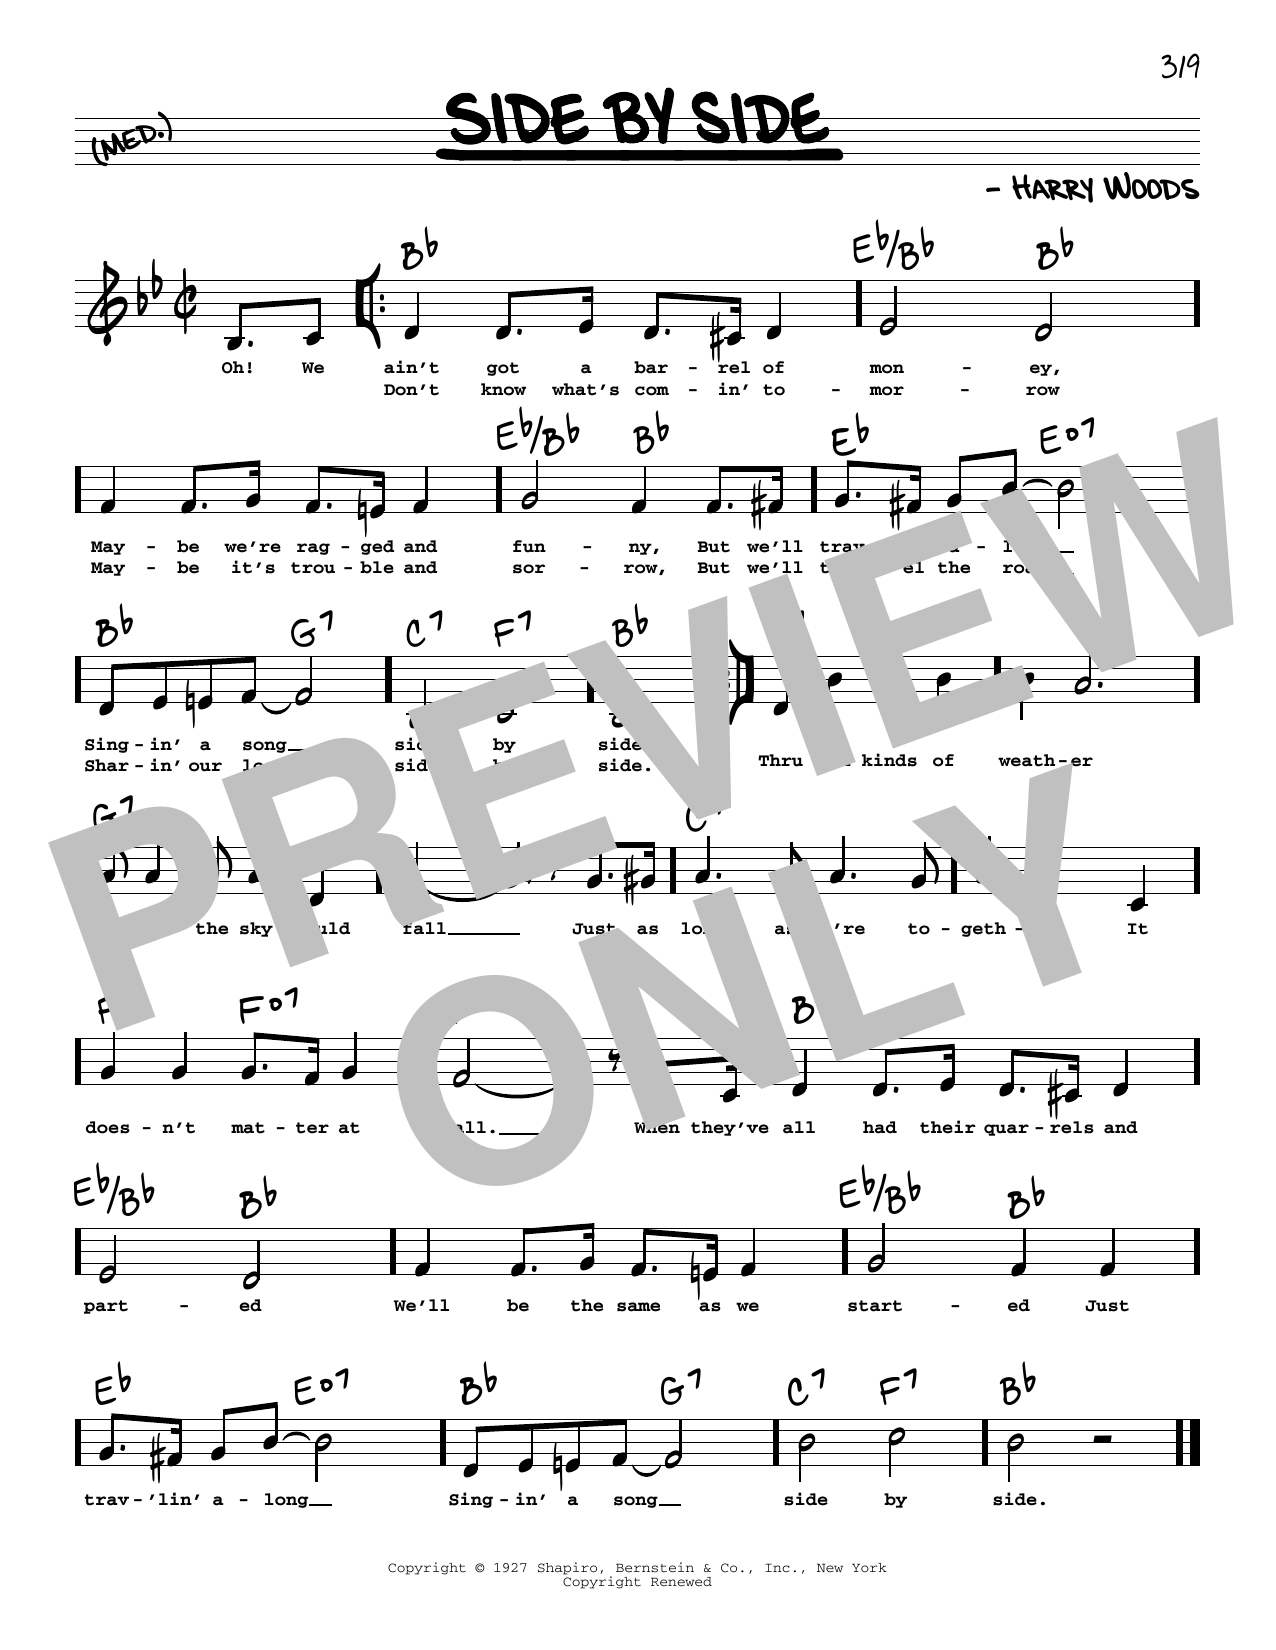 Patsy Cline Side By Side (Low Voice) sheet music notes printable PDF score